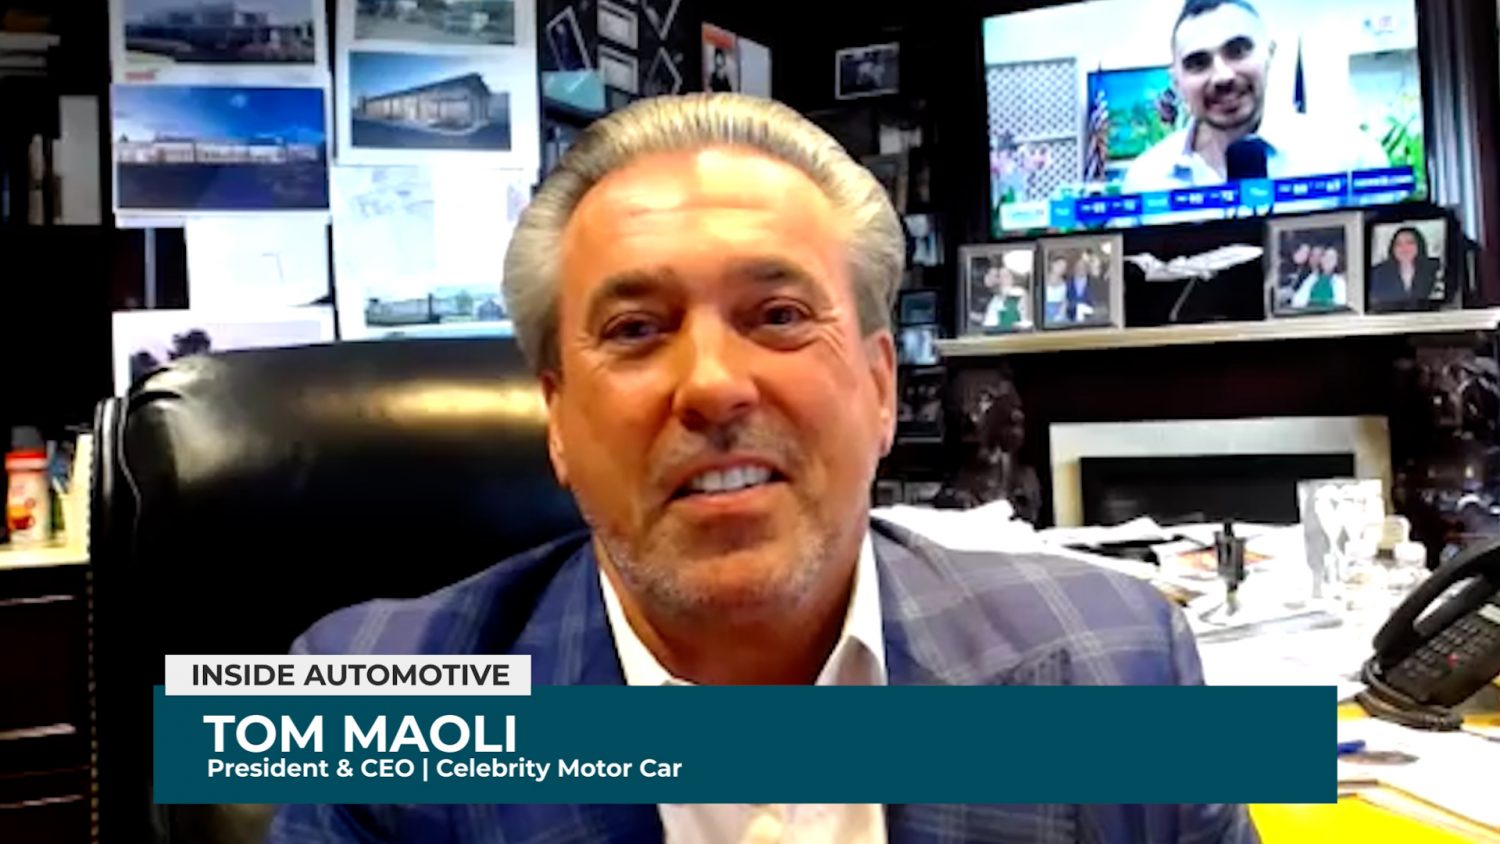 According to Tom Maoli, the cyberattacks on CDK Global have caused significant disruptions in dealership operations.